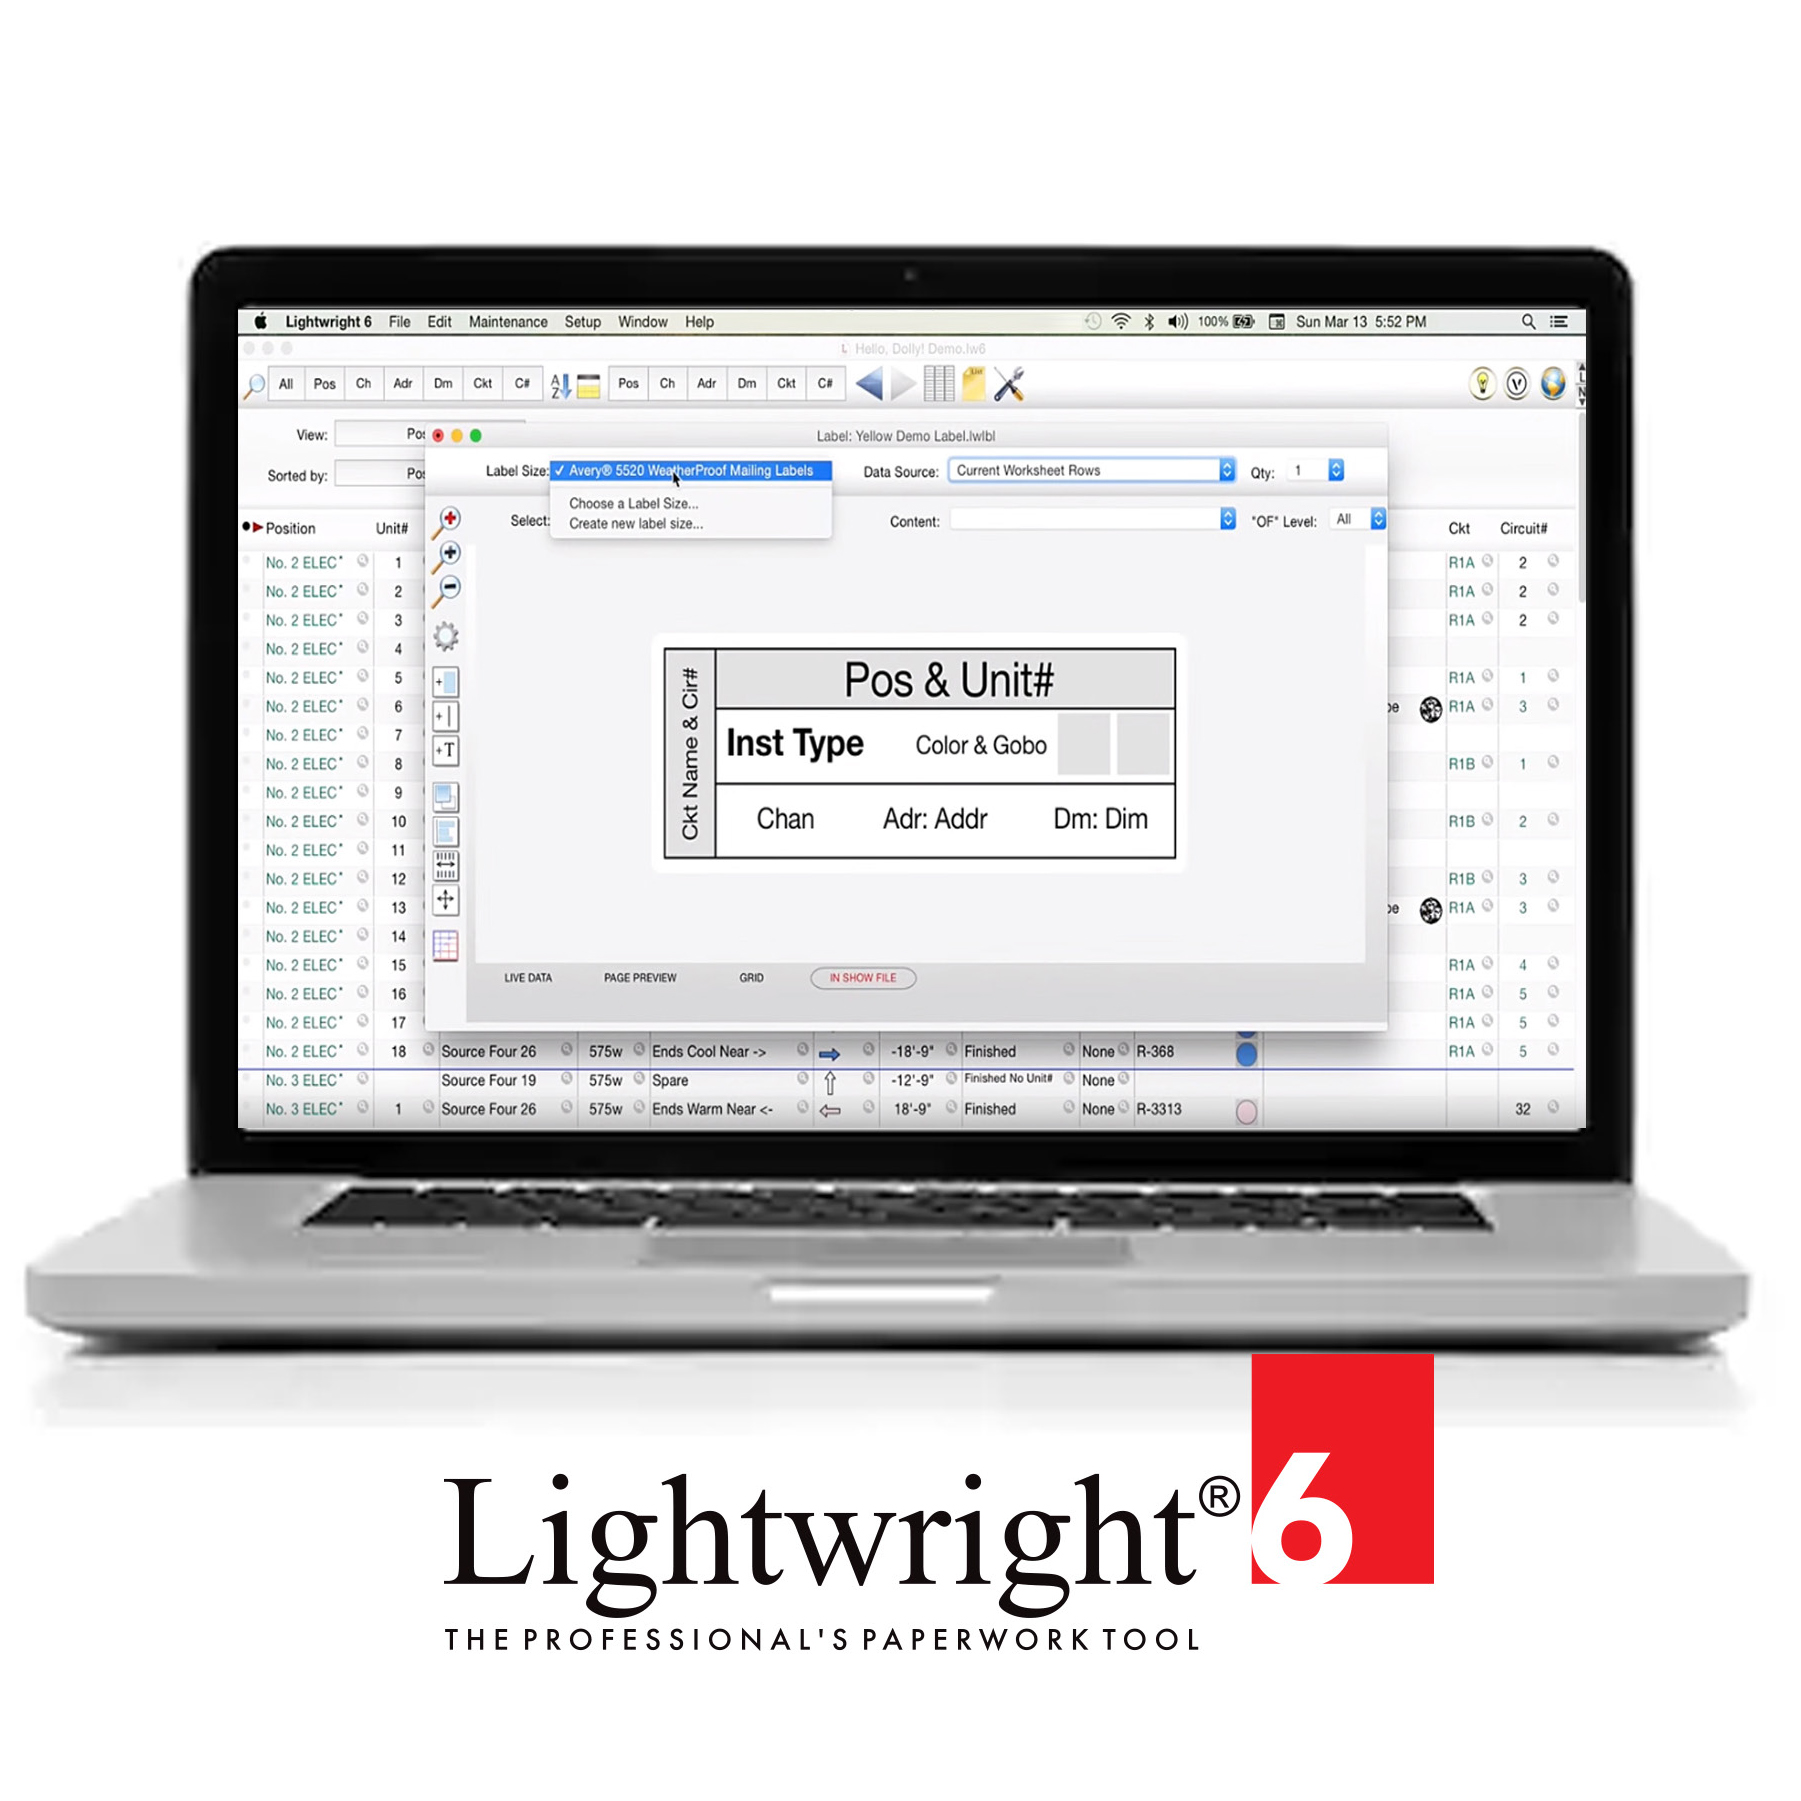 Farewell to Lightwright 6 software